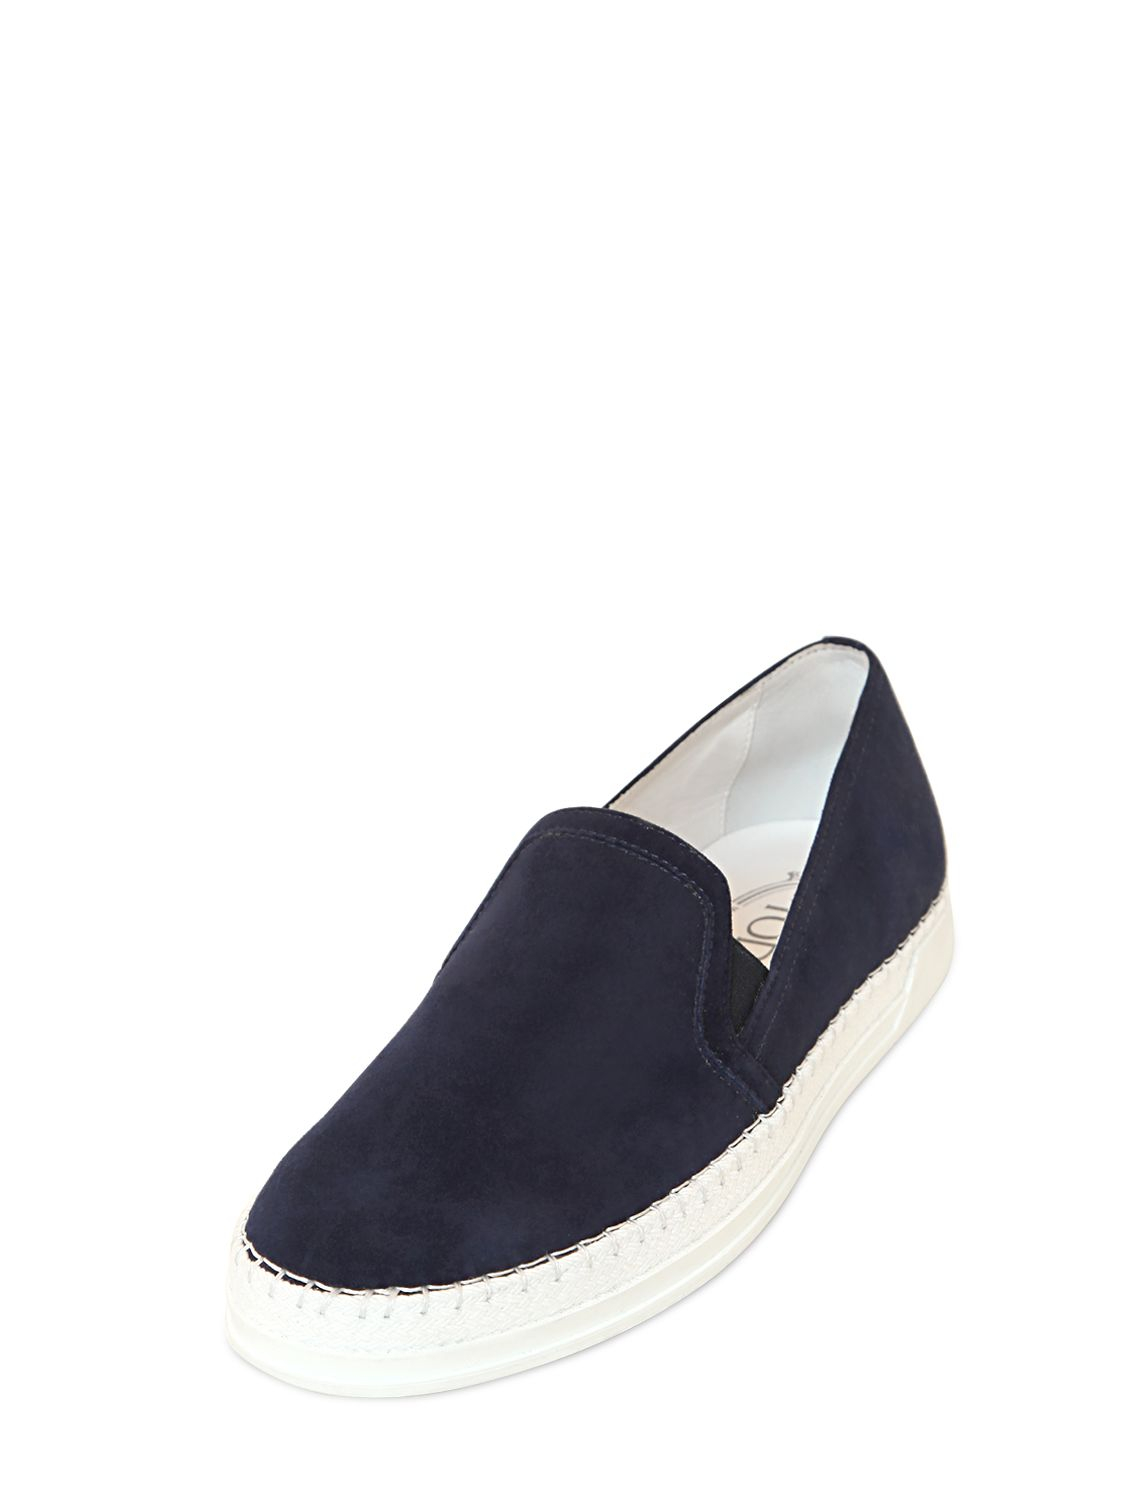 tod's slip on shoes